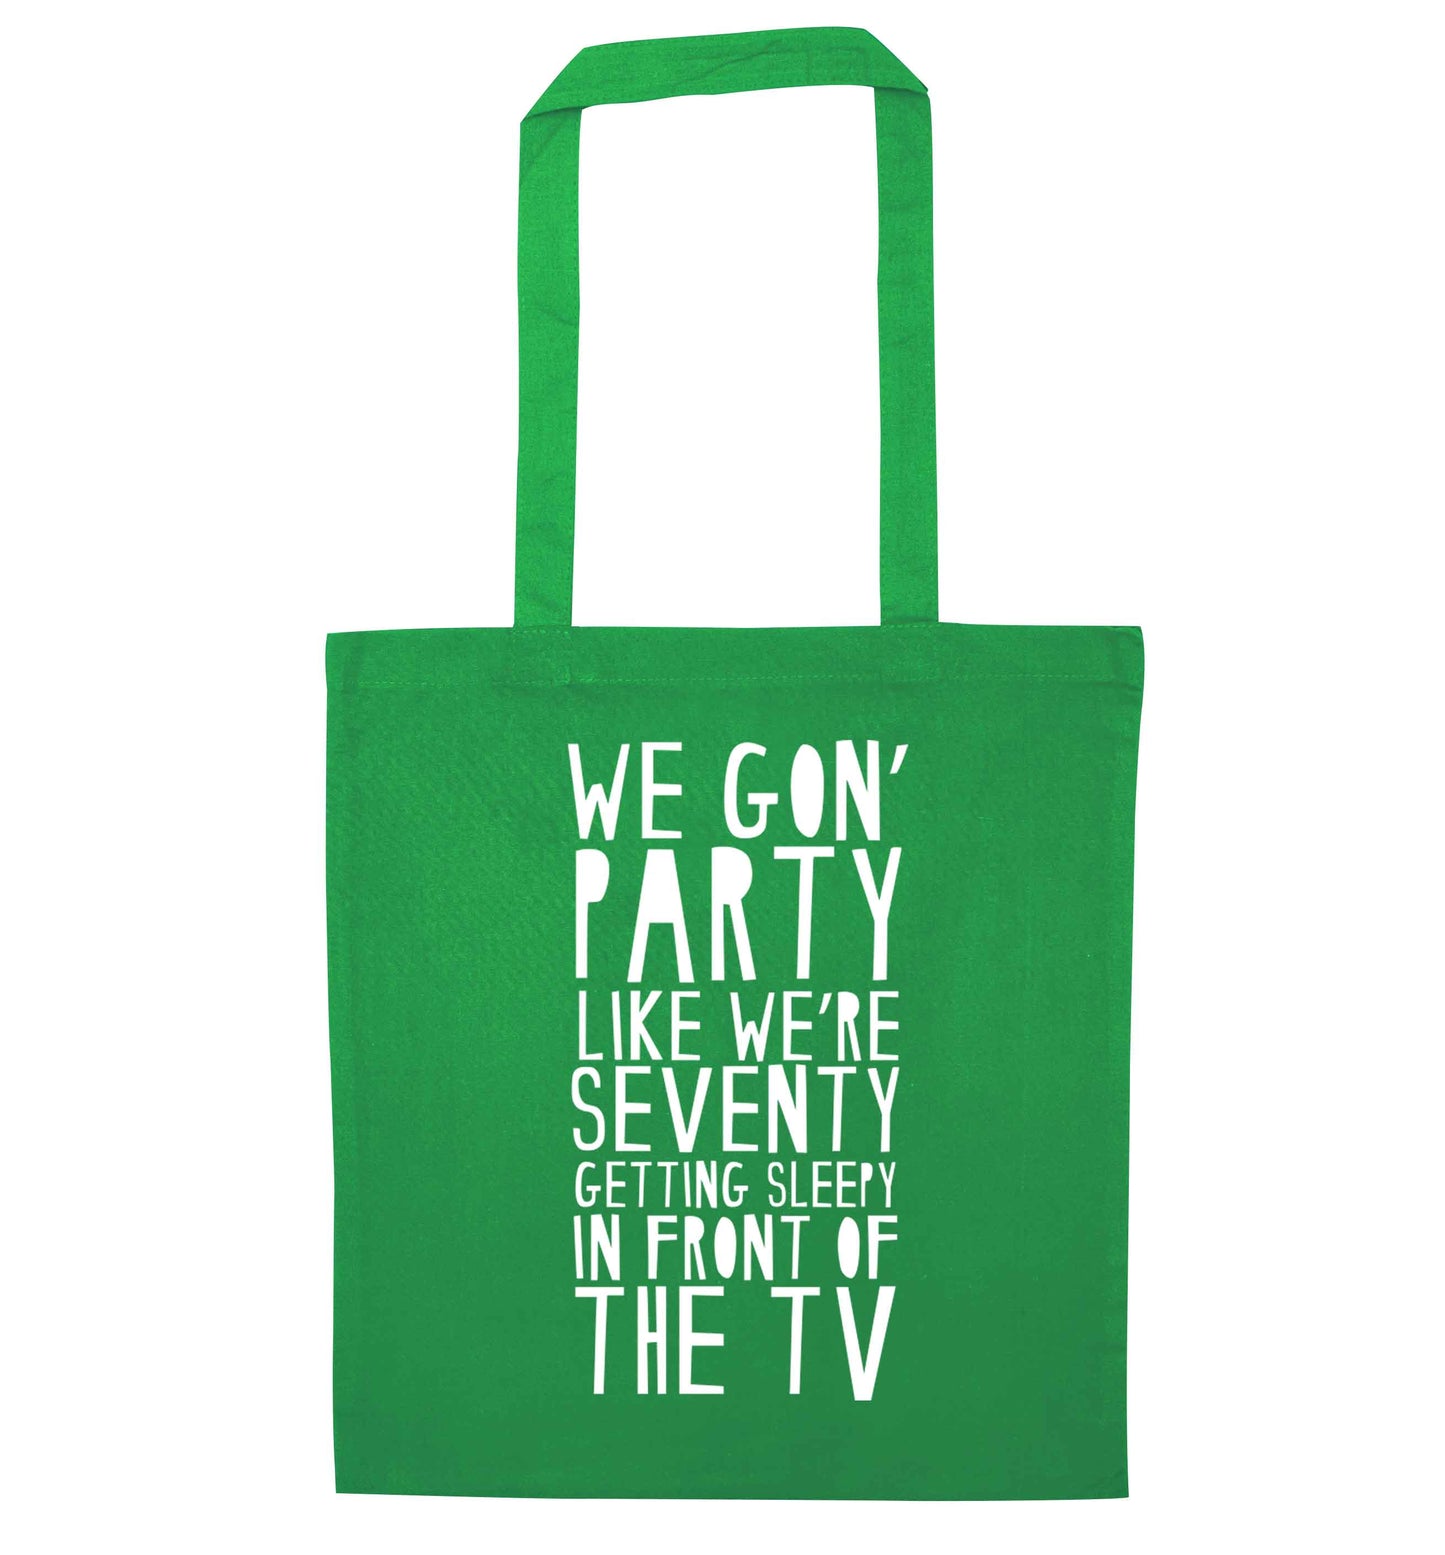 We gon' party like we're seventy getting sleepy in front of the TV green tote bag